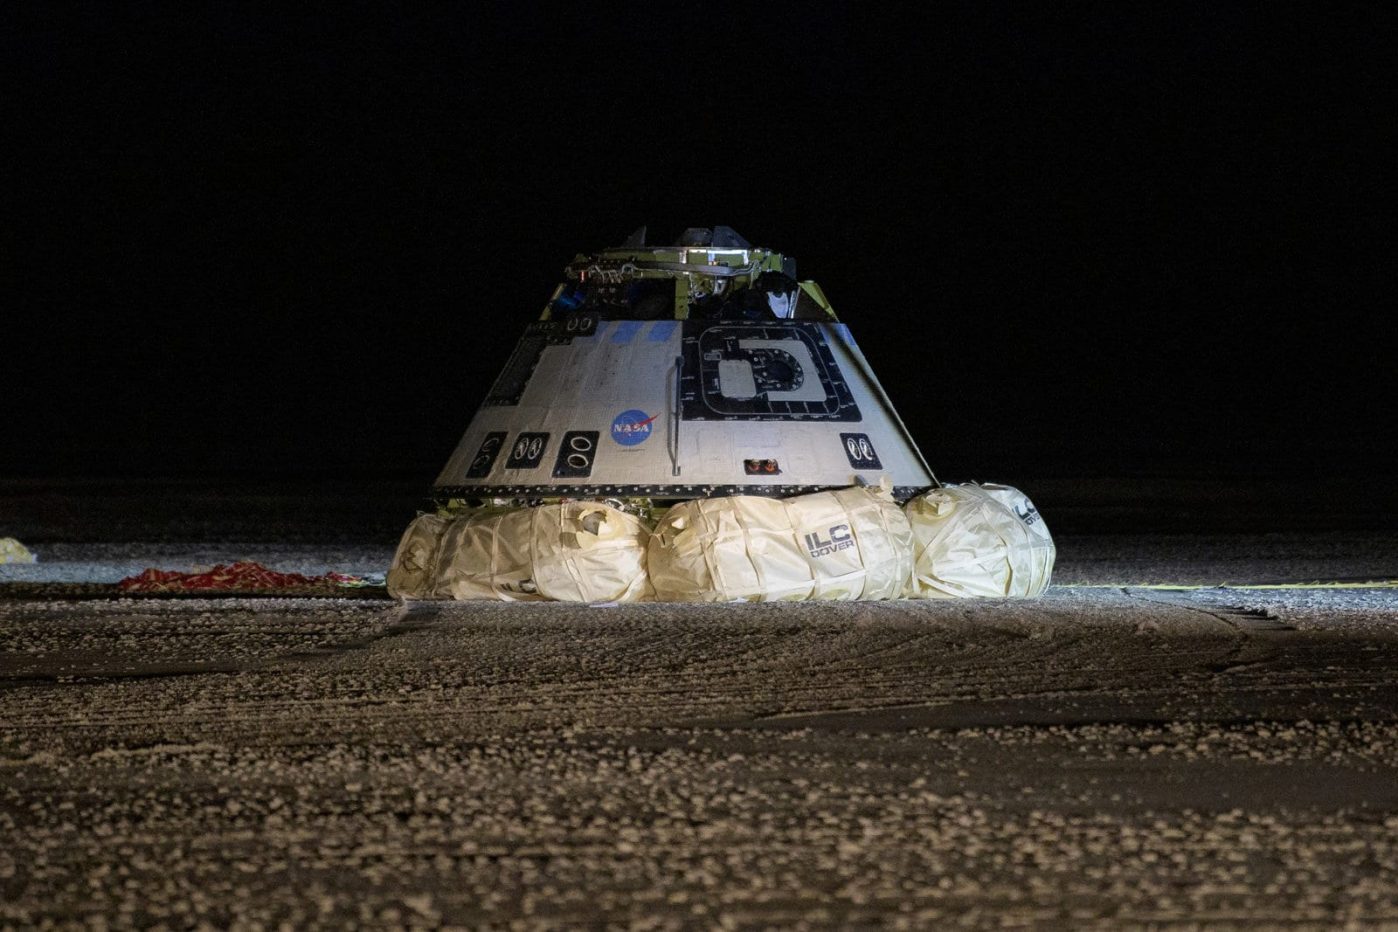 Boeing Starliner returns after failed mission to ISS